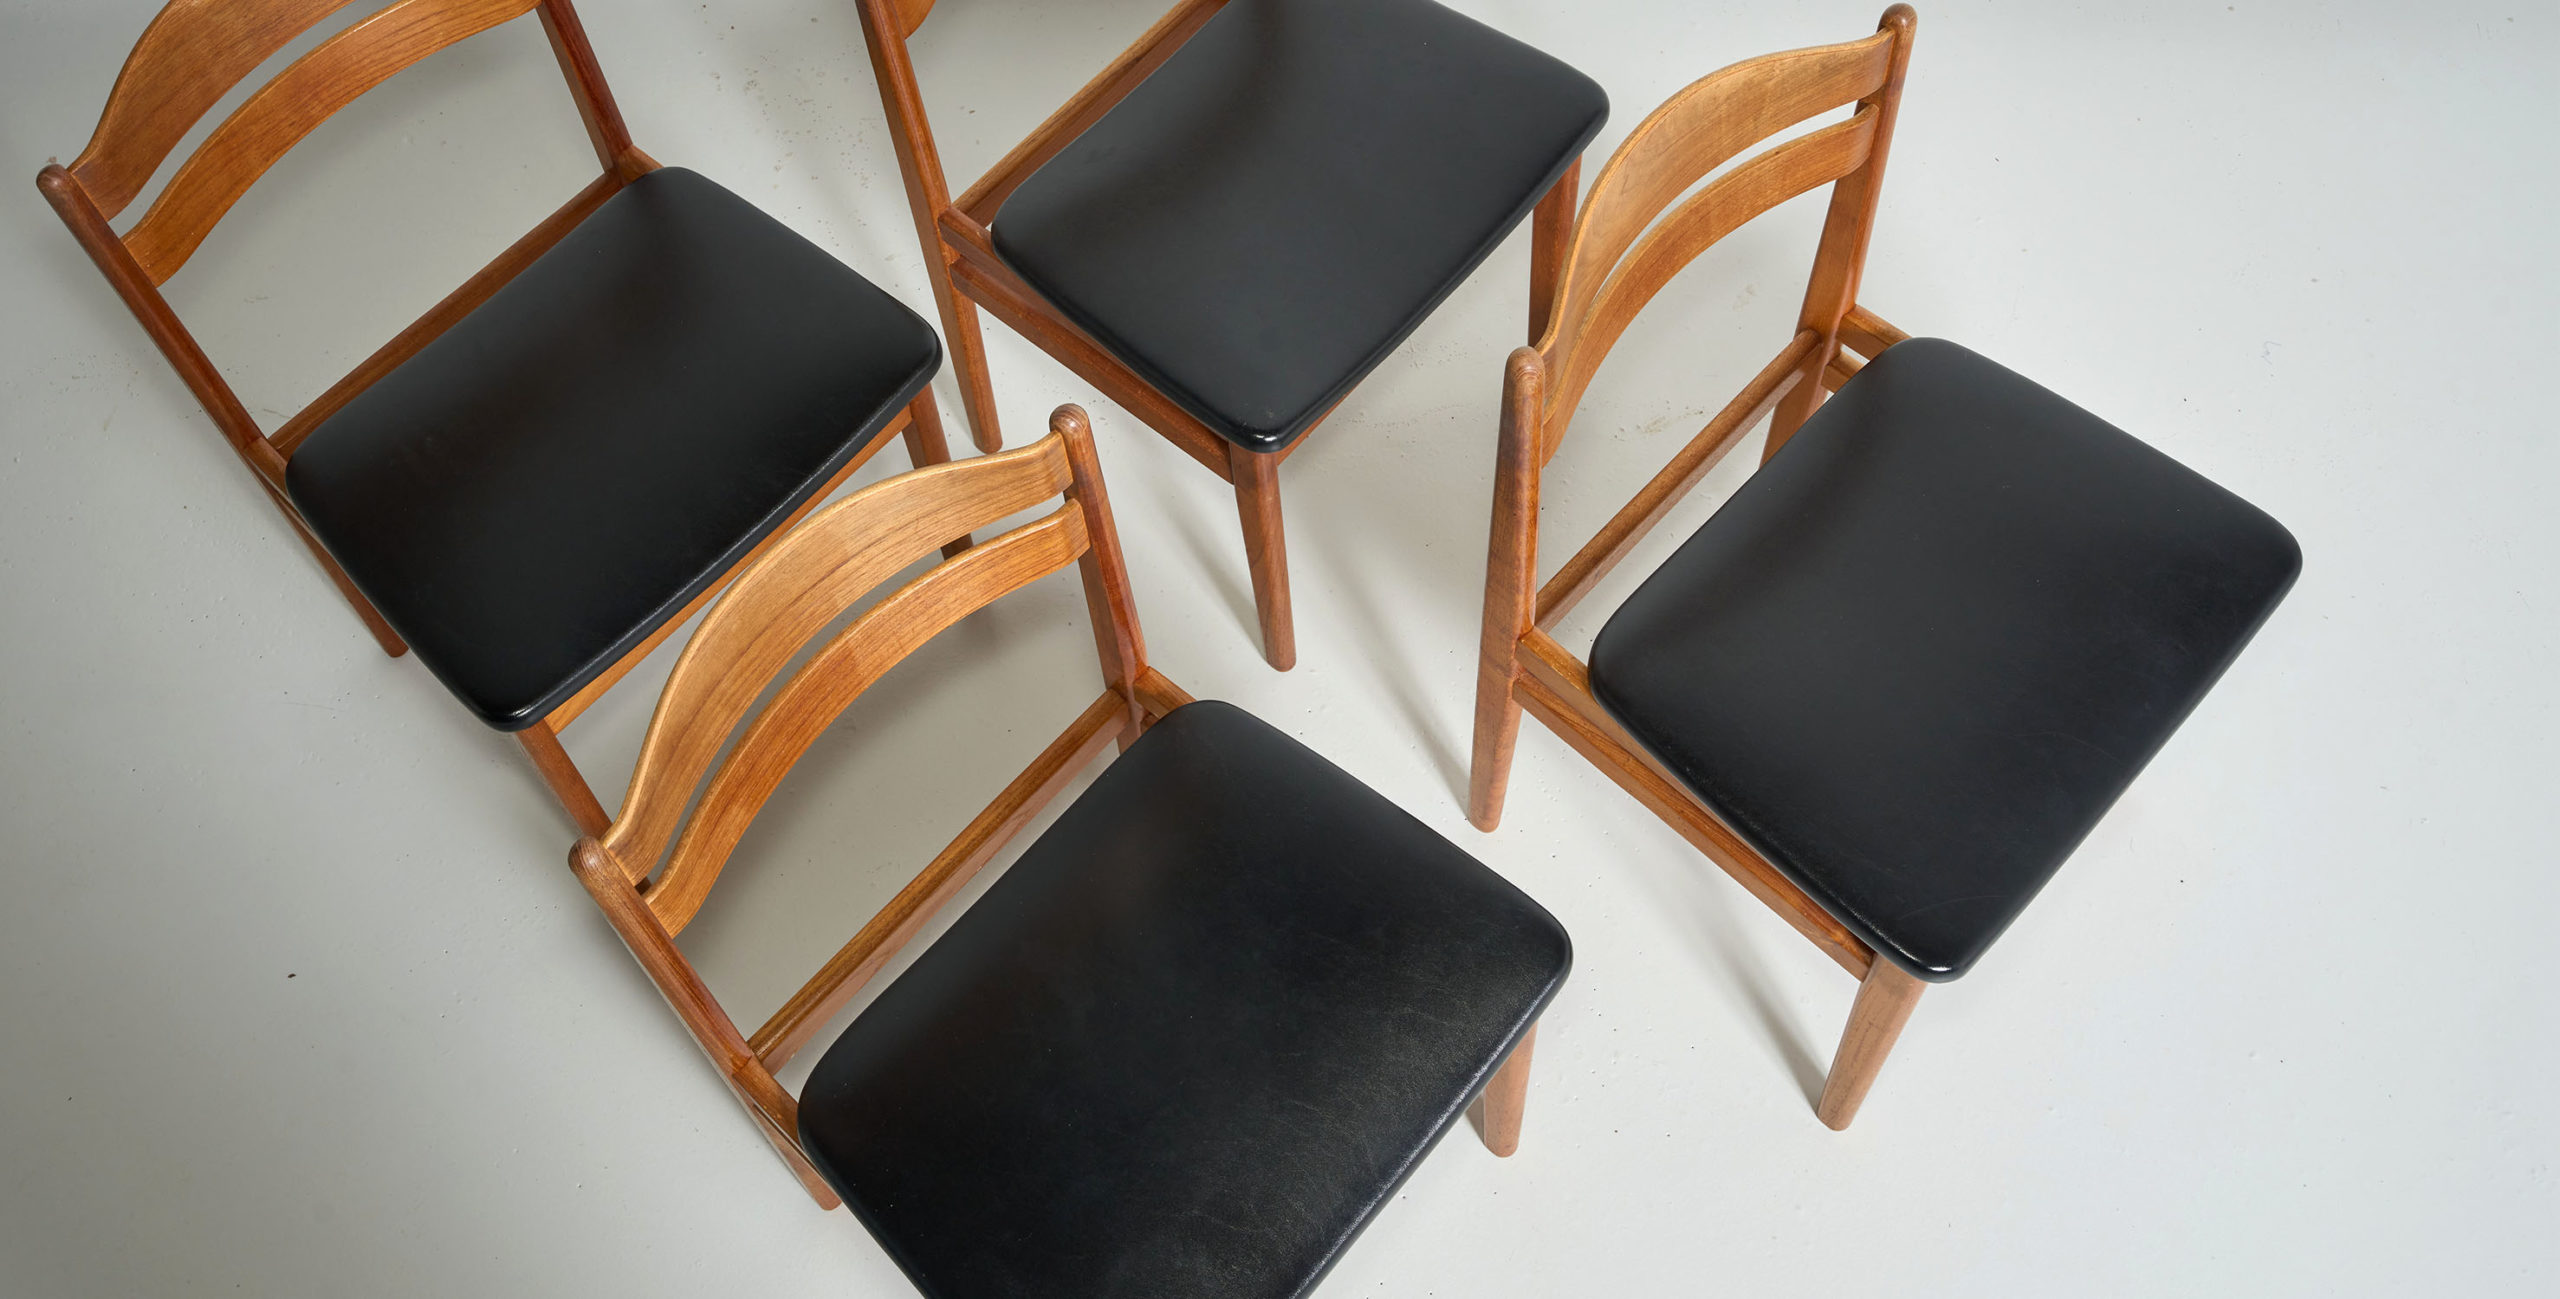 niels vodder, chaises niels vodder, 4 chaises vintage, chaises scandinaves, chaises teck, chaises danoises, chaises teck et skai vintage, chaise noire vintage, 4 chaises scandinaves, 4 chaises anglaises vintage, 4 chaises en teck, 4 chaises vintage en teck, chaises style scandinave, chaises g plan